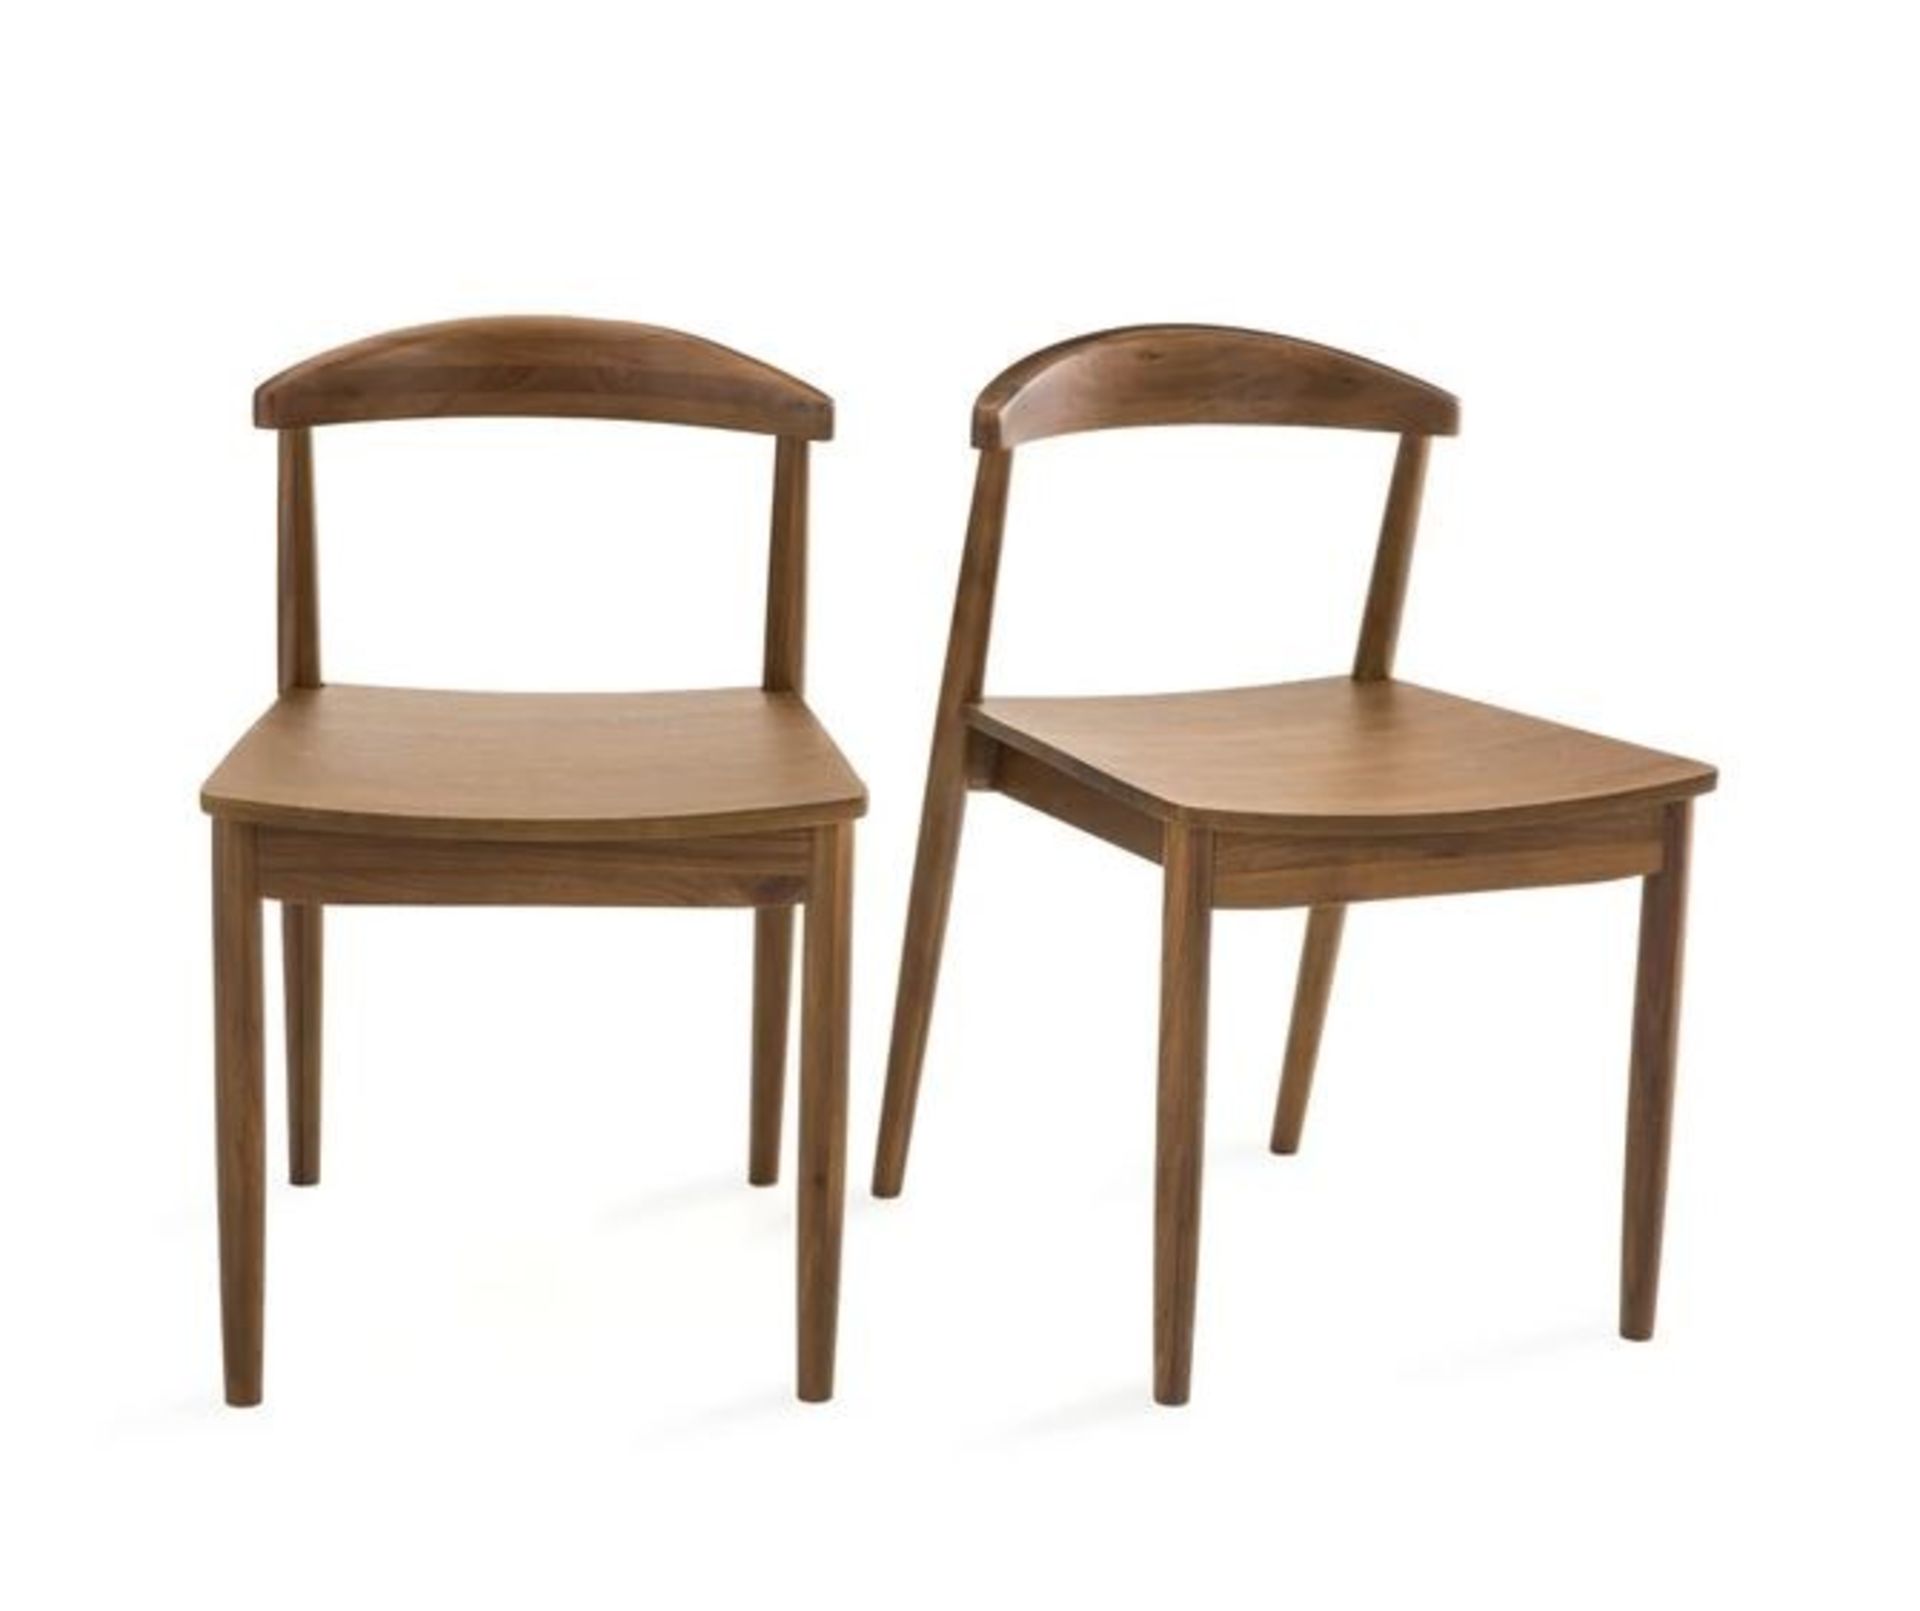 LA REDOUTE GALB WOODEN CHAIRS (SET OF 2)